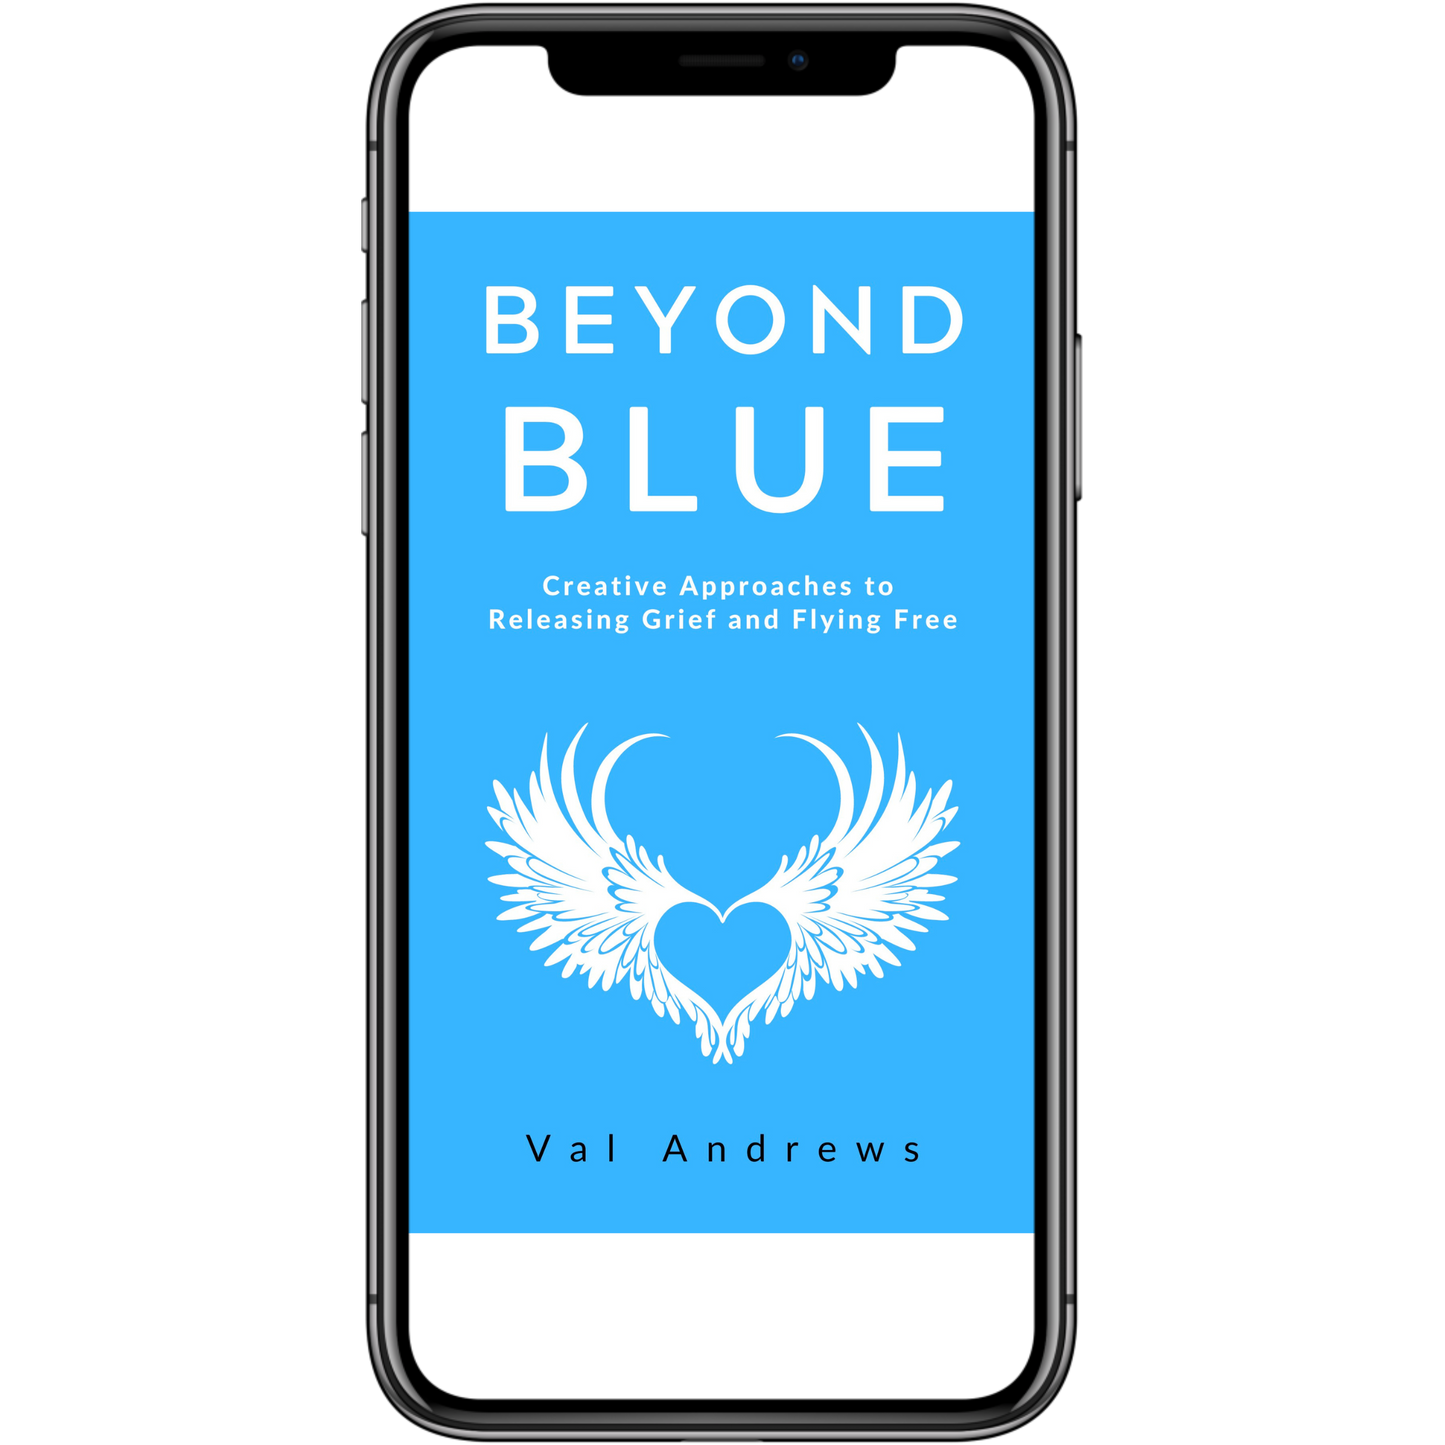 Beyond Blue: Creative approaches to releasing grief and flying free